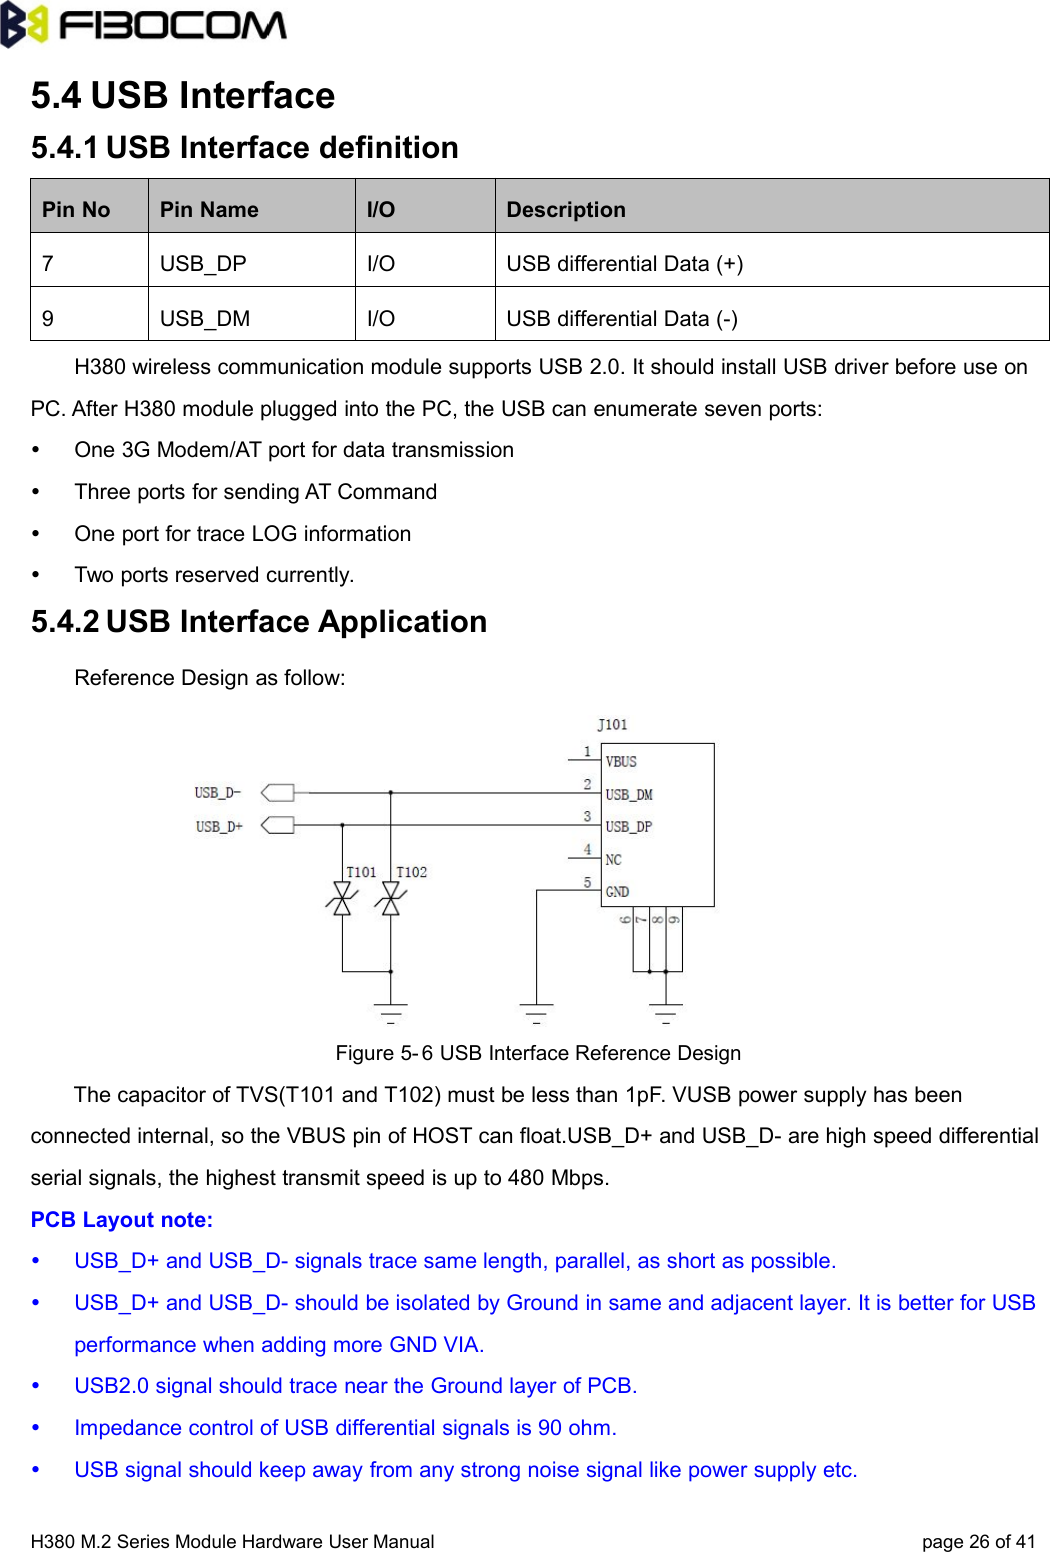 H380 M.2 Series Module Hardware User Manual page 26 of 415.4 USB Interface5.4.1 USB Interface definitionPin No Pin Name I/O Description7 USB_DP I/O USB differential Data (+)9 USB_DM I/O USB differential Data (-)H380 wireless communication module supports USB 2.0. It should install USB driver before use onPC. After H380 module plugged into the PC, the USB can enumerate seven ports:One 3G Modem/AT port for data transmissionThree ports for sending AT CommandOne port for trace LOG informationTwo ports reserved currently.5.4.2 USB Interface ApplicationReference Design as follow:Figure 5- 6 USB Interface Reference DesignThe capacitor of TVS(T101 and T102) must be less than 1pF. VUSB power supply has beenconnected internal, so the VBUS pin of HOST can float.USB_D+ and USB_D- are high speed differentialserial signals, the highest transmit speed is up to 480 Mbps.PCB Layout note:USB_D+ and USB_D- signals trace same length, parallel, as short as possible.USB_D+ and USB_D- should be isolated by Ground in same and adjacent layer. It is better for USBperformance when adding more GND VIA.USB2.0 signal should trace near the Ground layer of PCB.Impedance control of USB differential signals is 90 ohm.USB signal should keep away from any strong noise signal like power supply etc.